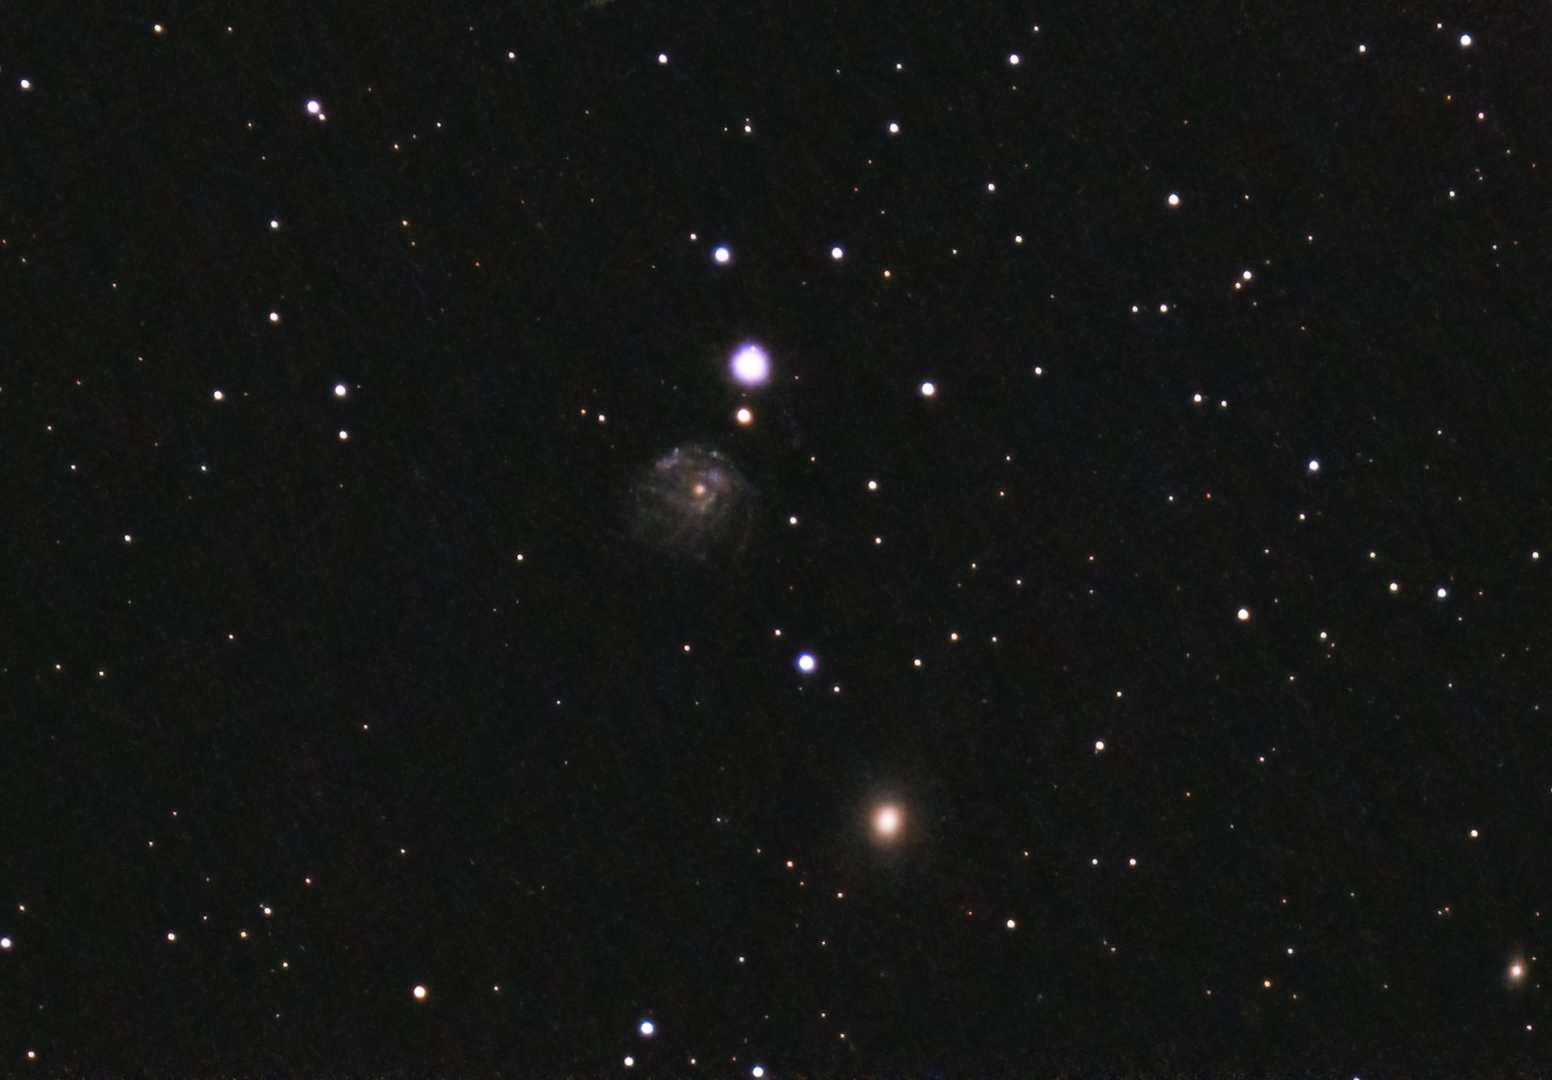 r_NGC2276_stacked-siril-PS-finale.jpg.2eb15f9af9541e432d23950f619eaaae.jpg